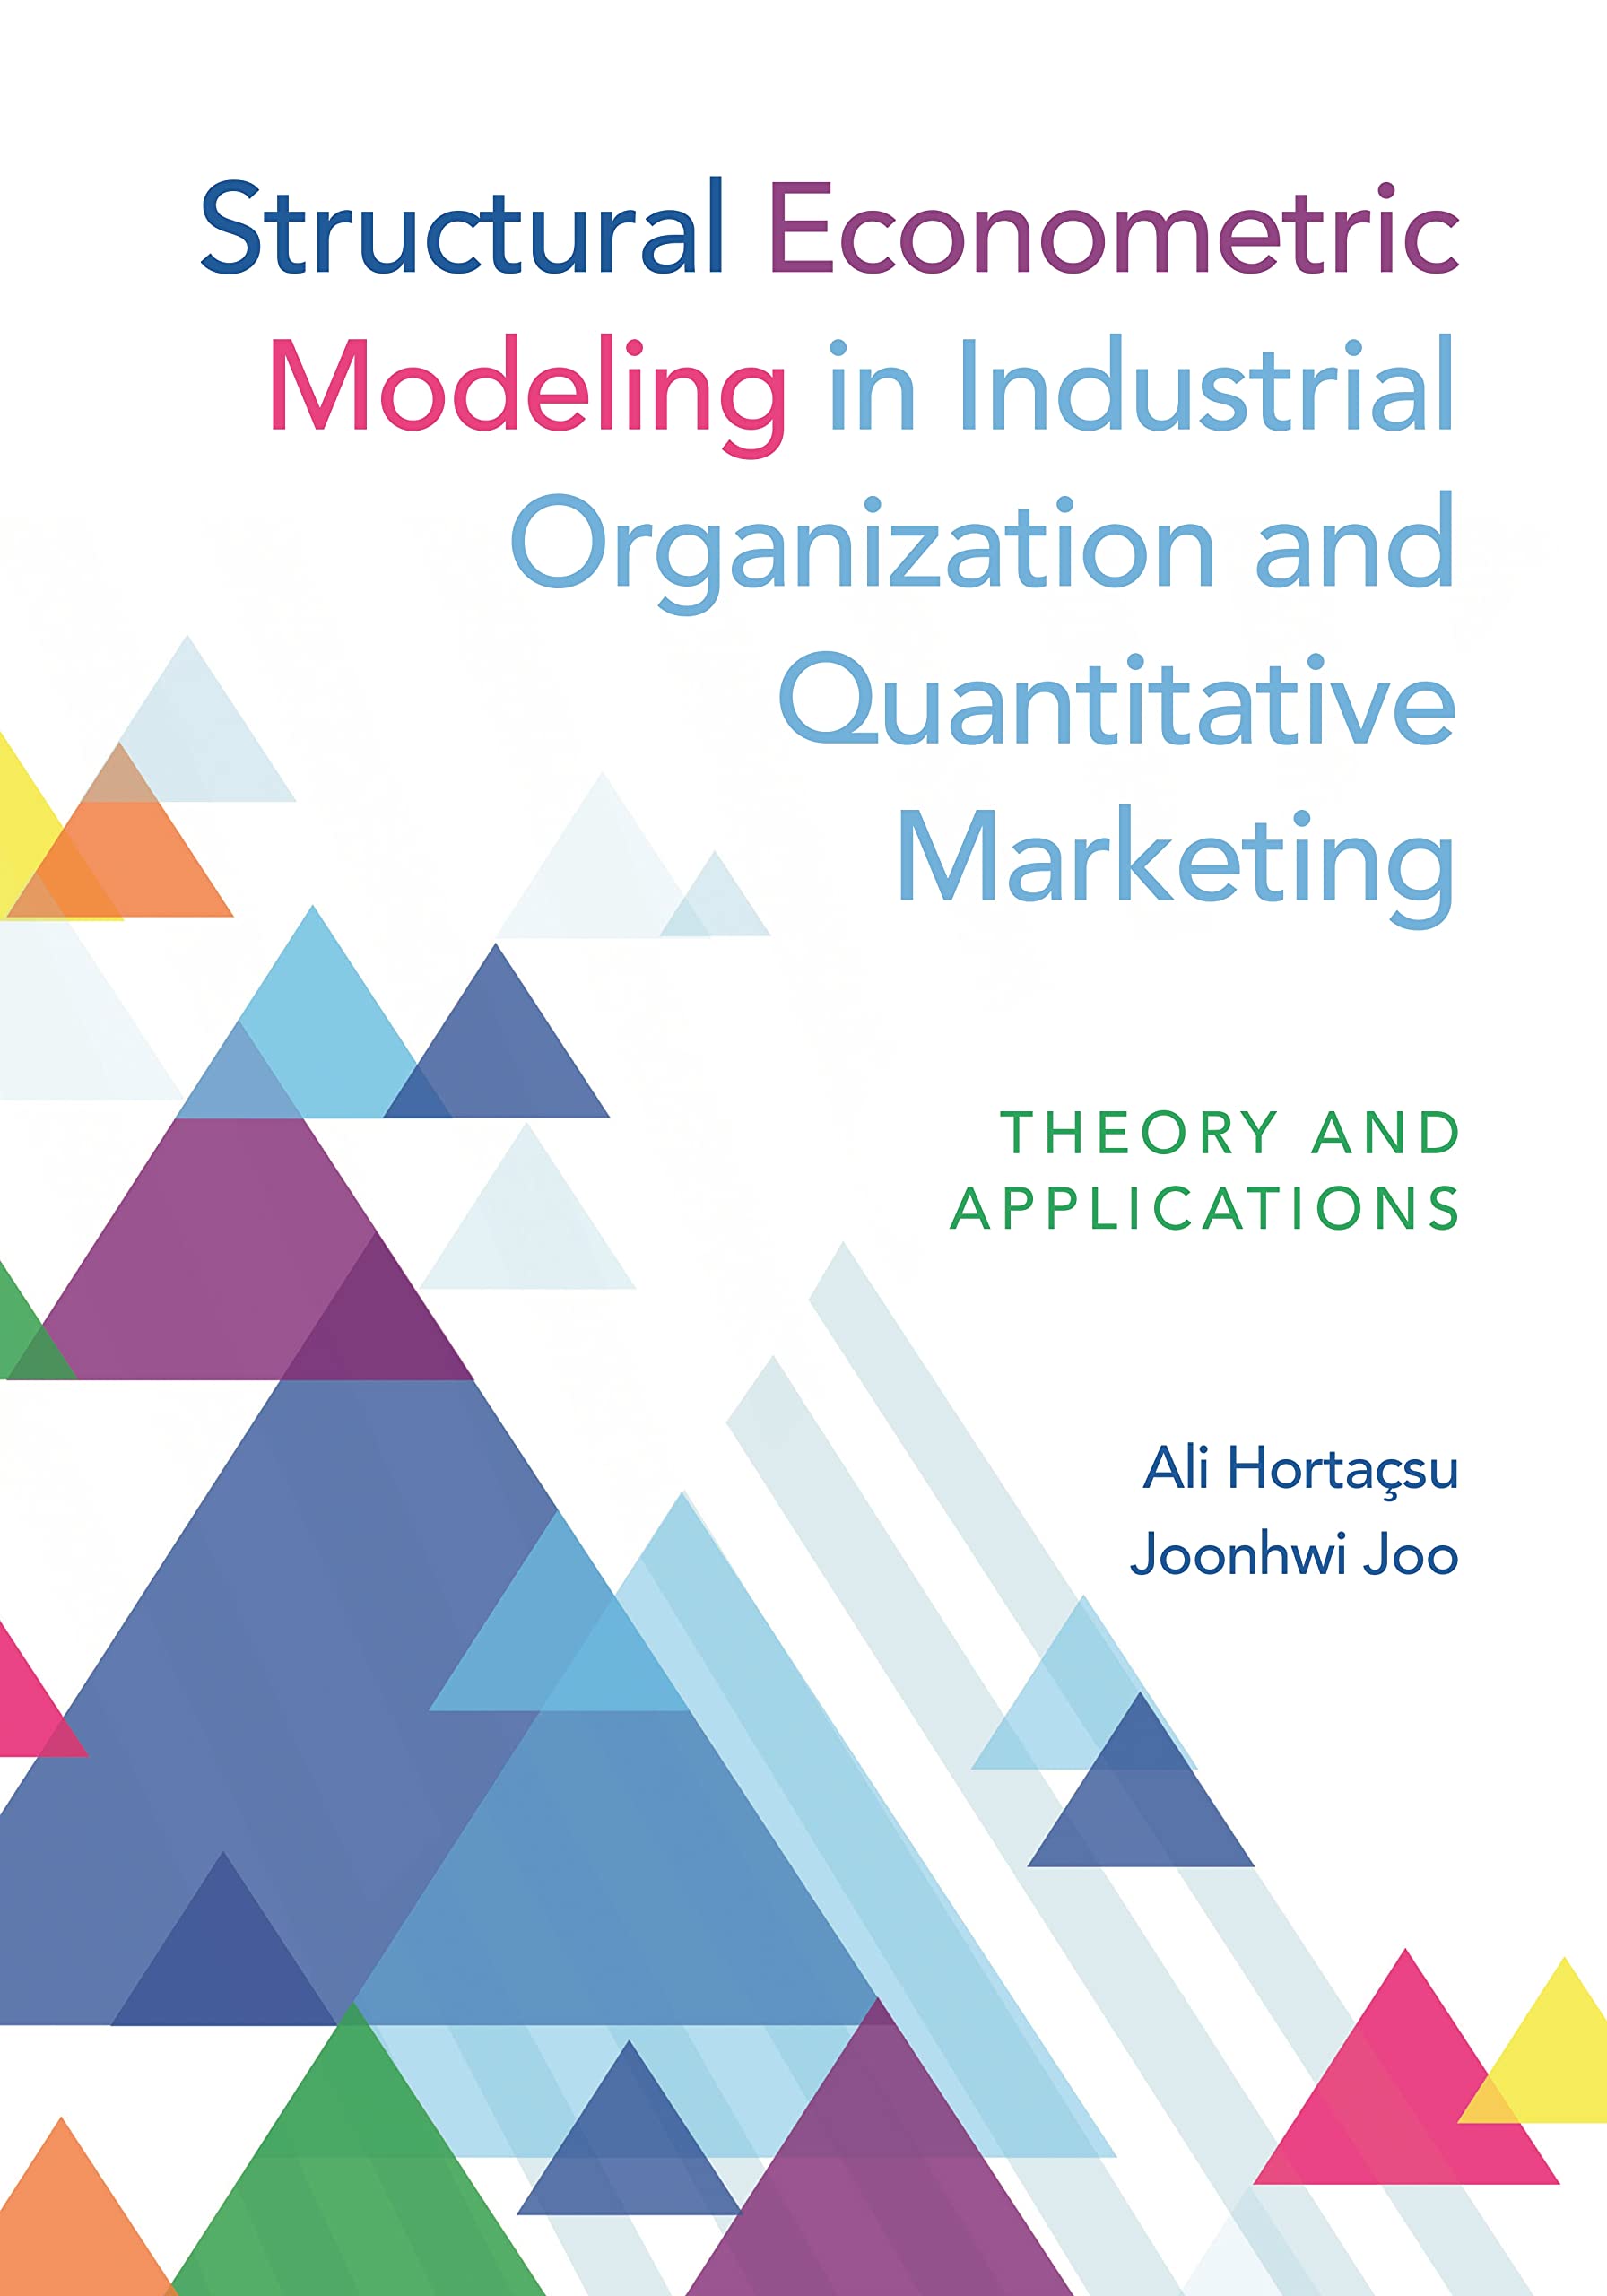 Structural Econometric Modeling in Industrial Organization and Quantitative Marketing: Theory and Applications